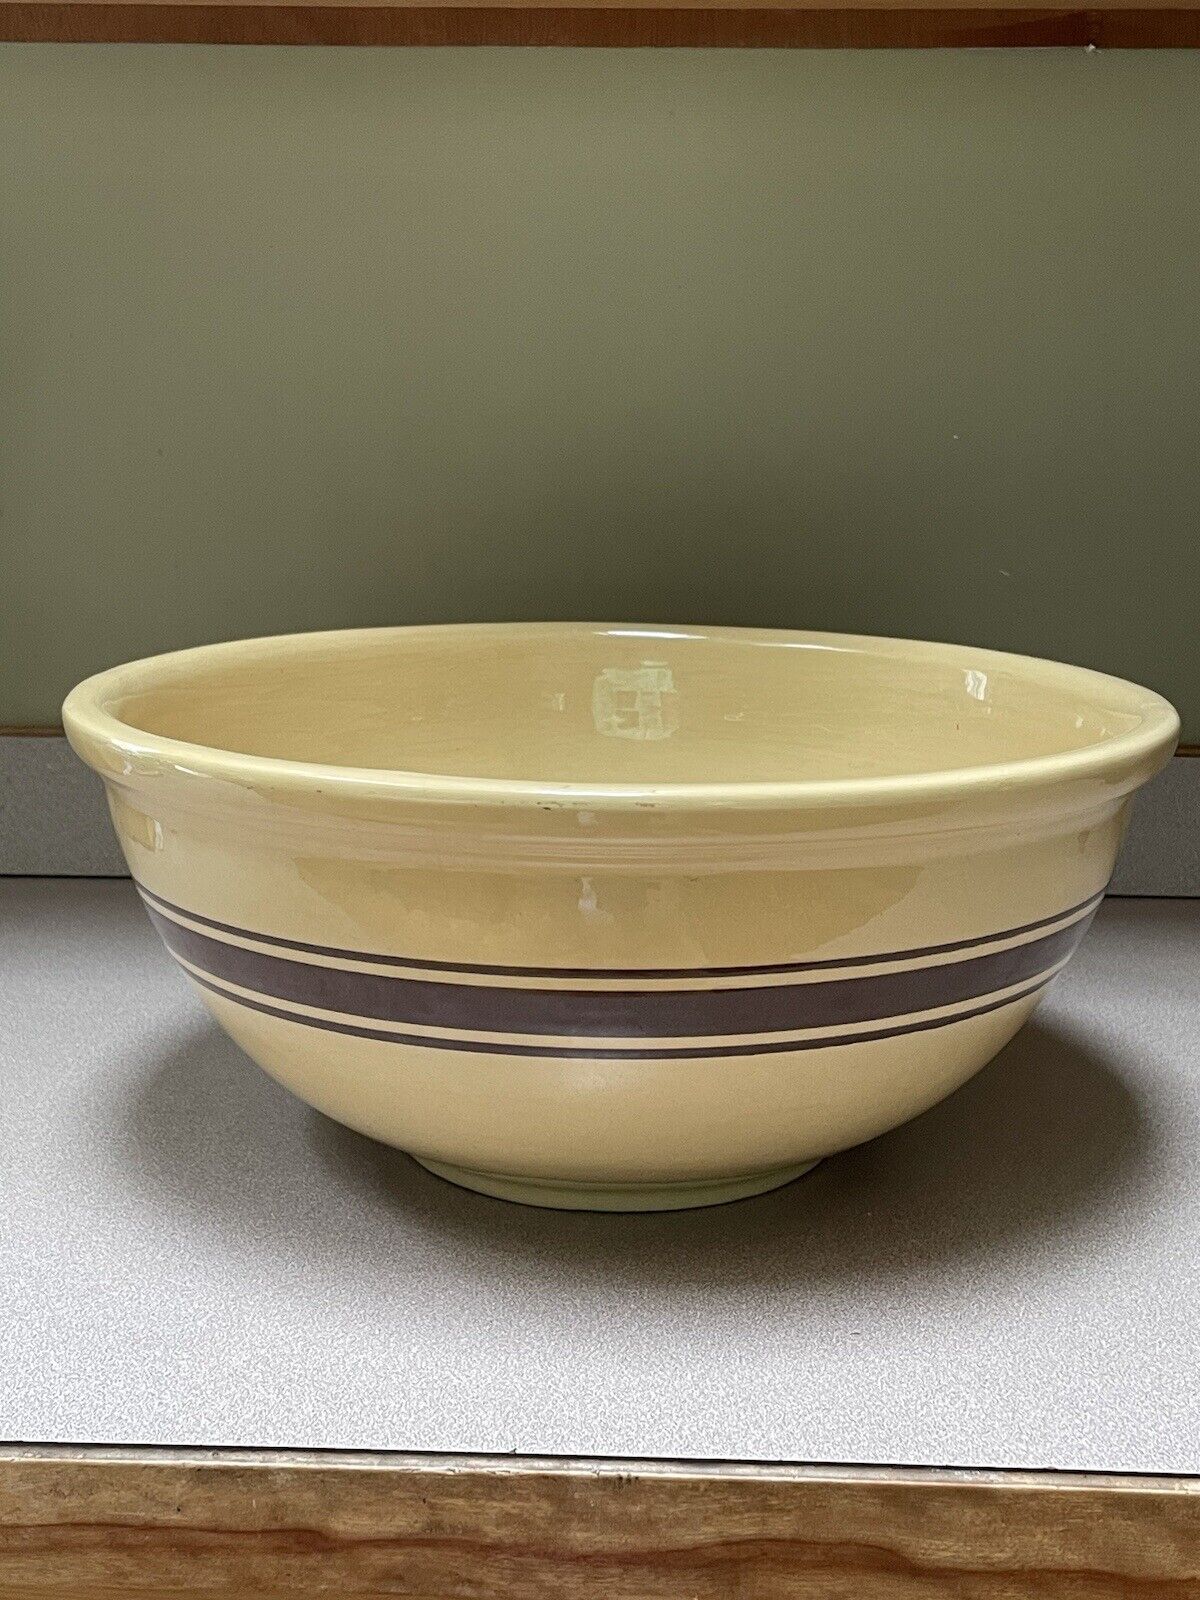 15” YELLOW WARE BATTER Largest MIXING BOWL 3 BROWN STRIPES USA Vintage RARE SIZE